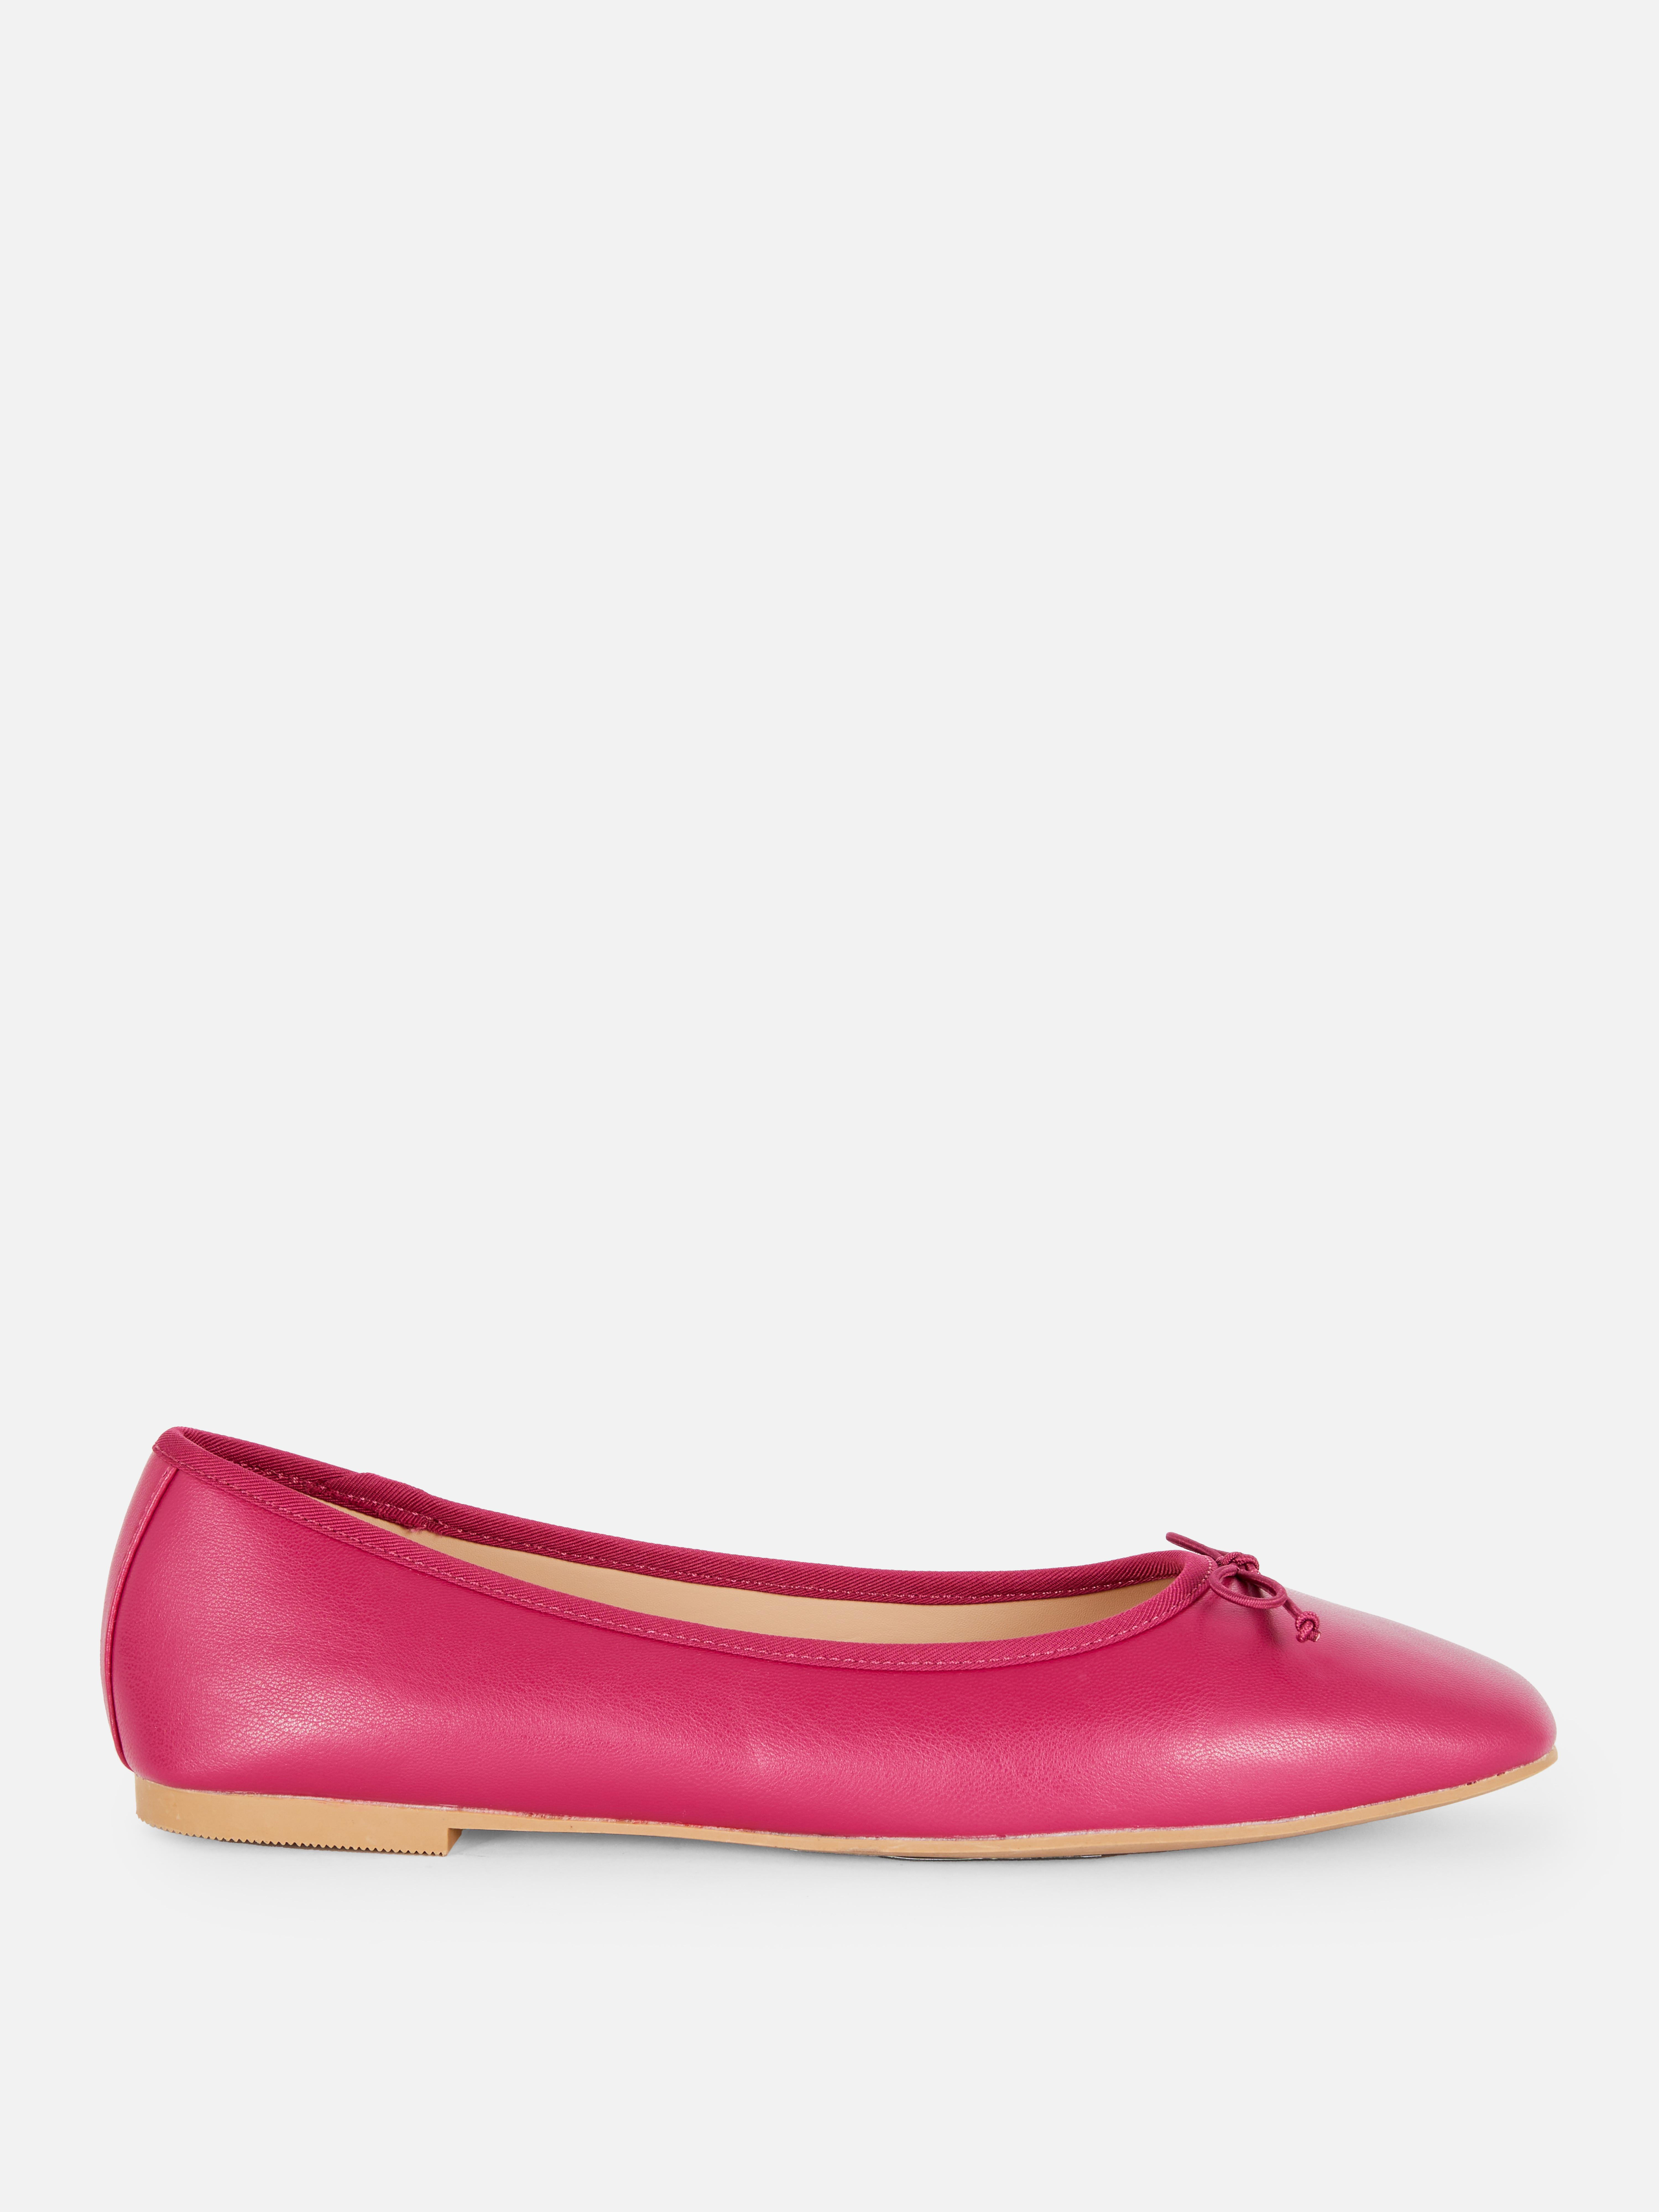 Bow Ballerinas | Ballet Shoes, Loafers & Pumps | Women's Shoes & Boots ...